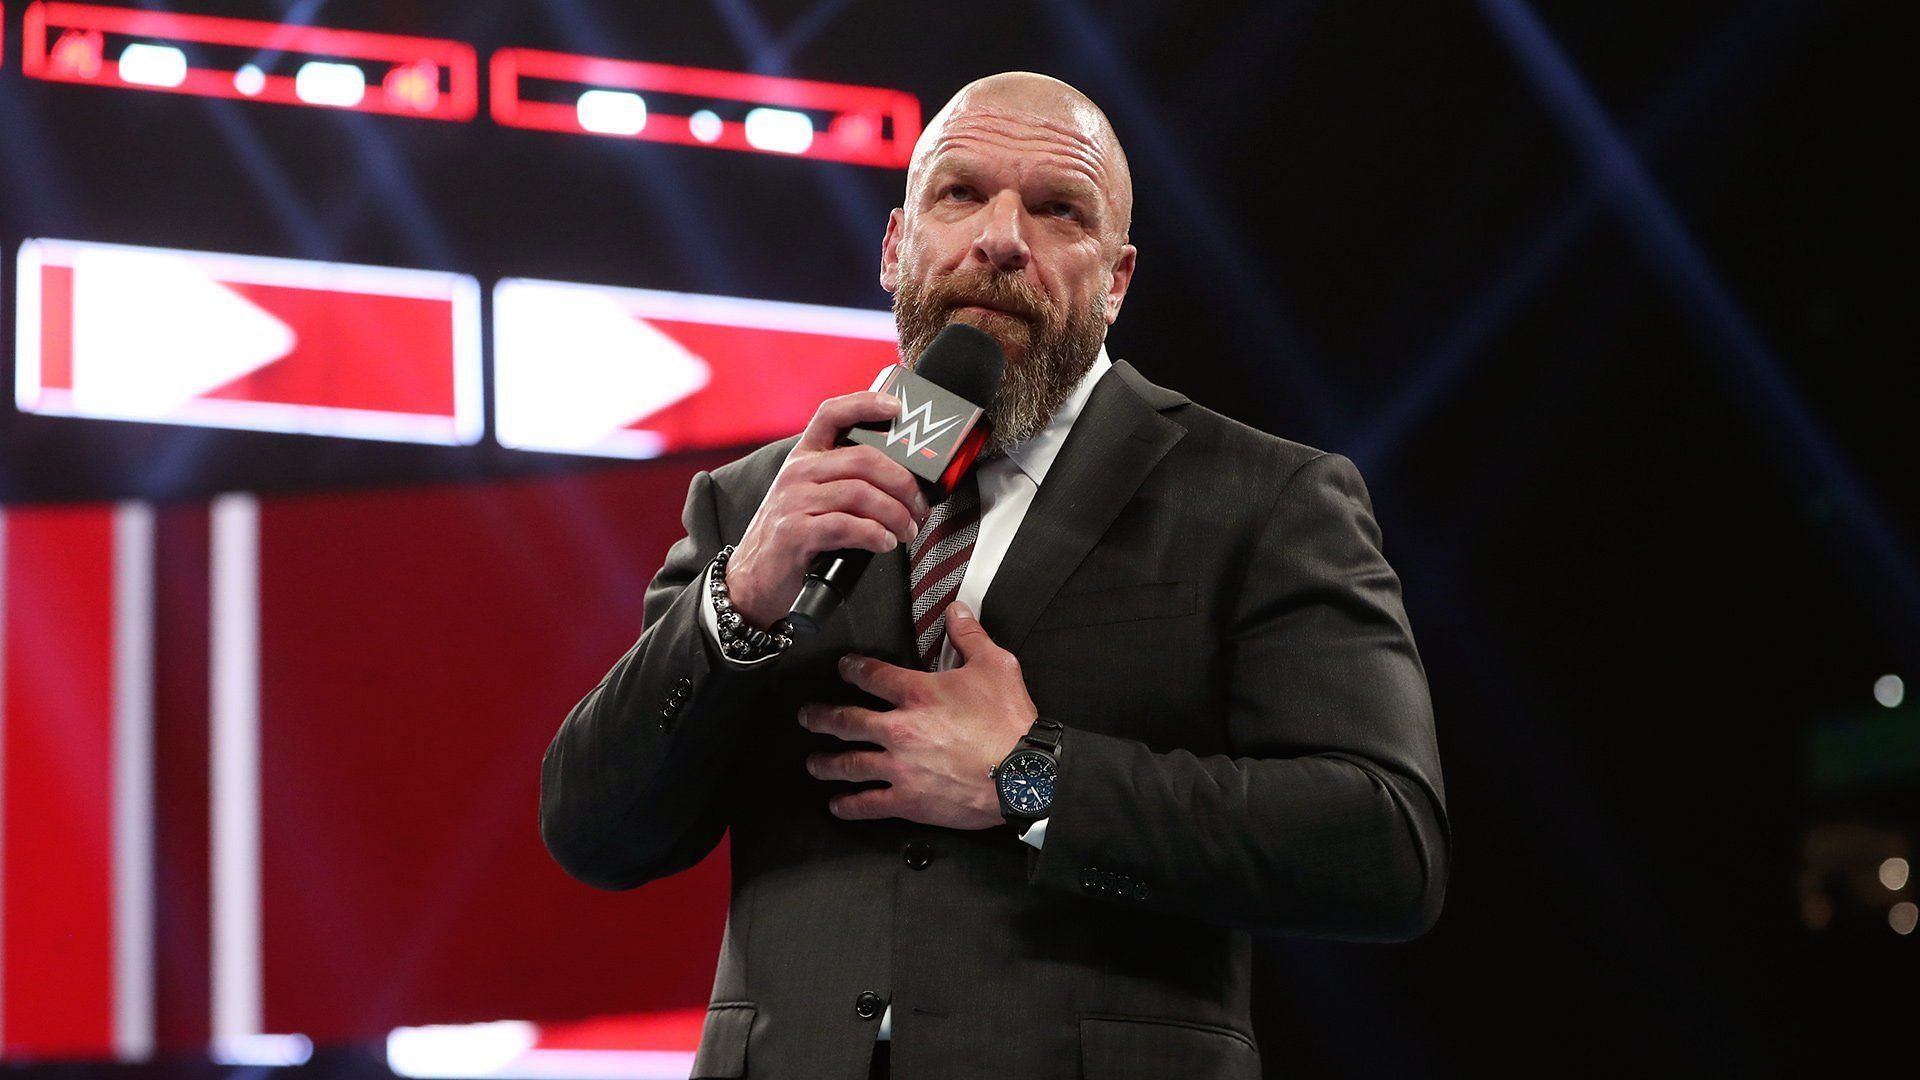 Triple H has brought back numerous released stars to WWE